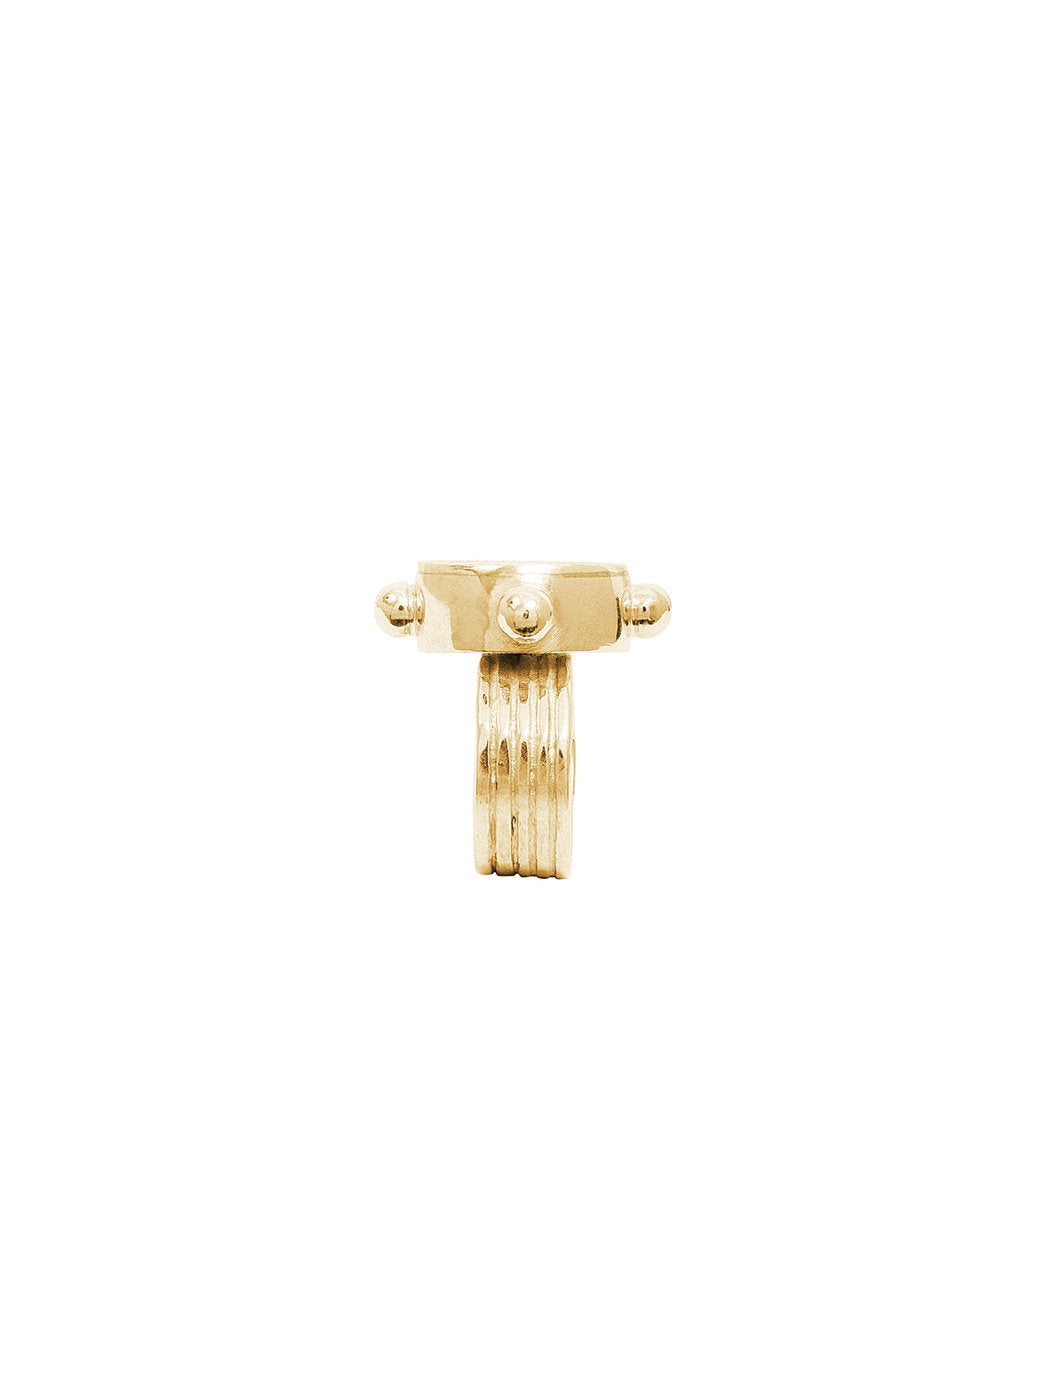 Fiorina Jewellery Gold Pinkie Ring Side View